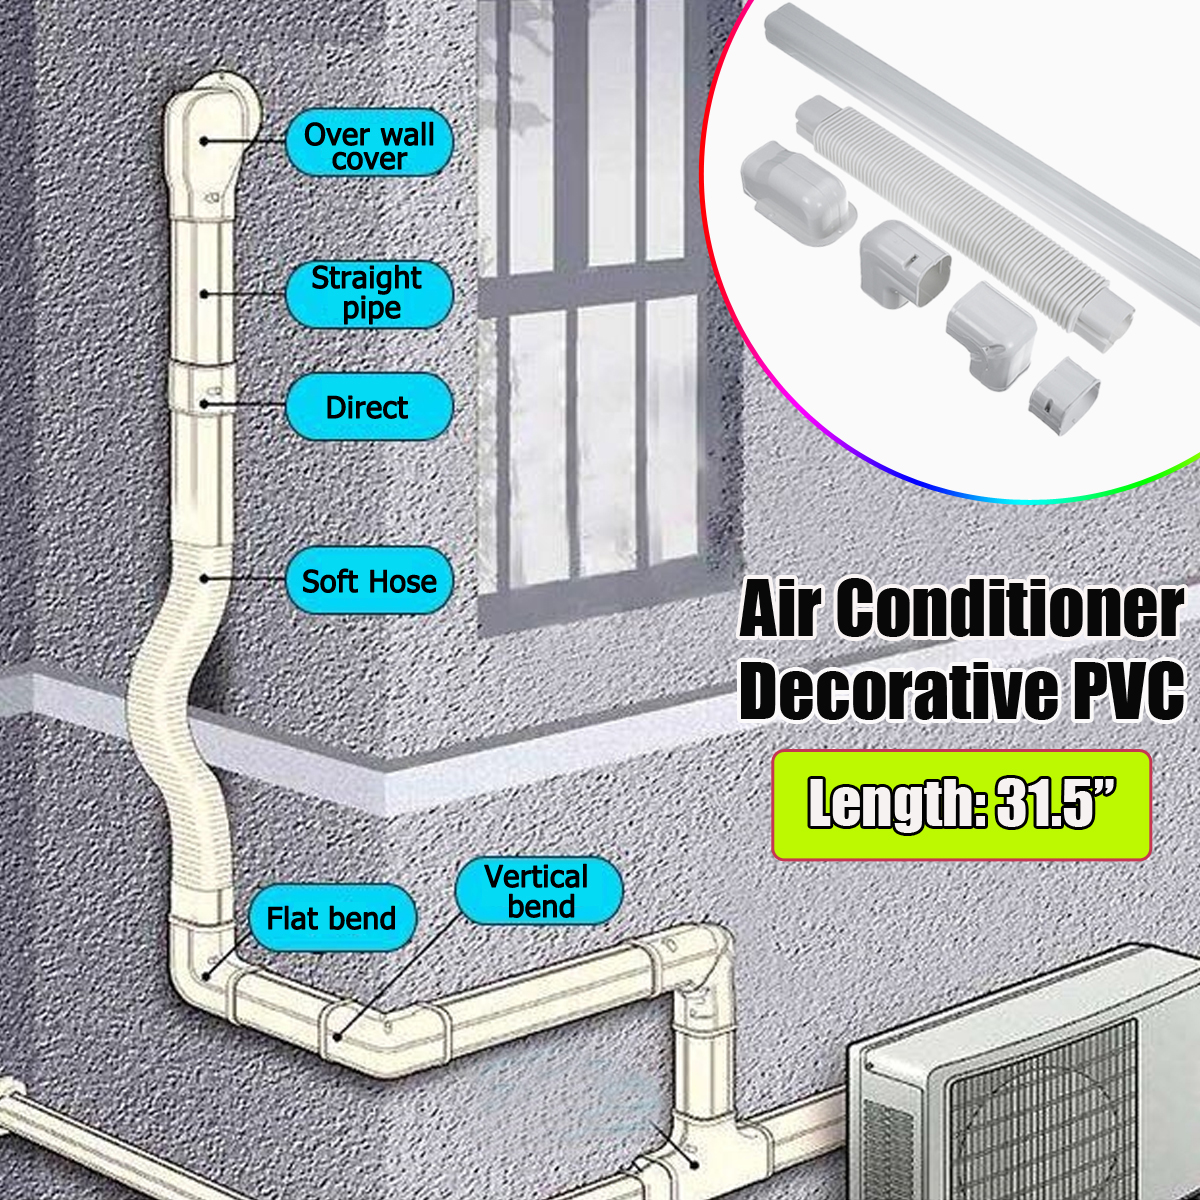 Air-Conditioning-PVC-Decorative-Tube-Flat-Bend-Soft-Hose-Duct-Slot-Pipes-System-Pipes-Fittings-1544953-7